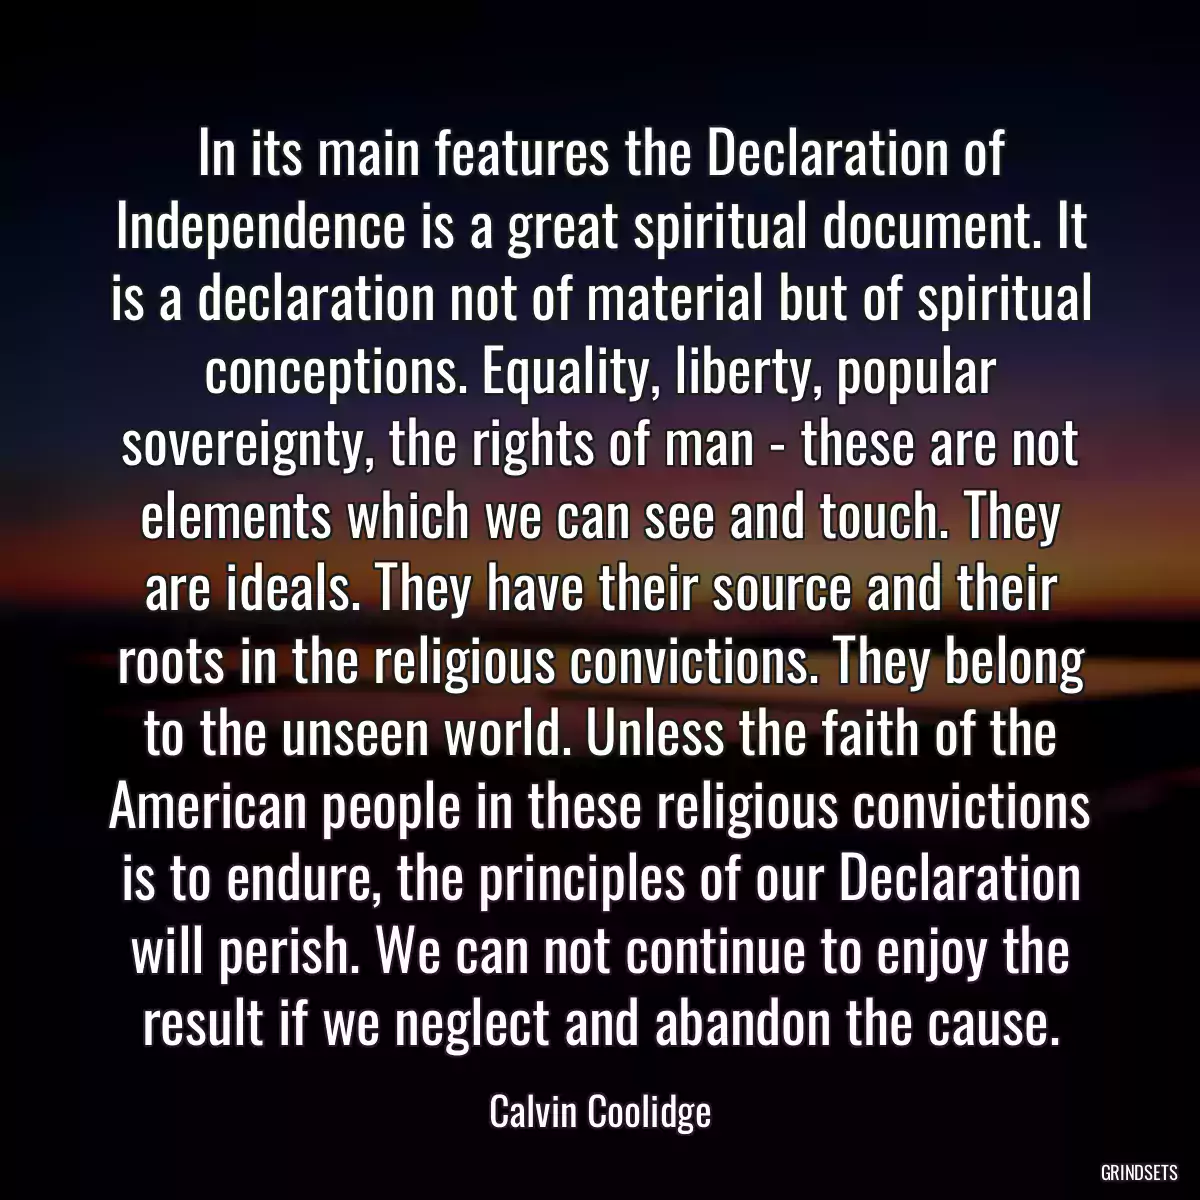 In its main features the Declaration of Independence is a great spiritual document. It is a declaration not of material but of spiritual conceptions. Equality, liberty, popular sovereignty, the rights of man - these are not elements which we can see and touch. They are ideals. They have their source and their roots in the religious convictions. They belong to the unseen world. Unless the faith of the American people in these religious convictions is to endure, the principles of our Declaration will perish. We can not continue to enjoy the result if we neglect and abandon the cause.